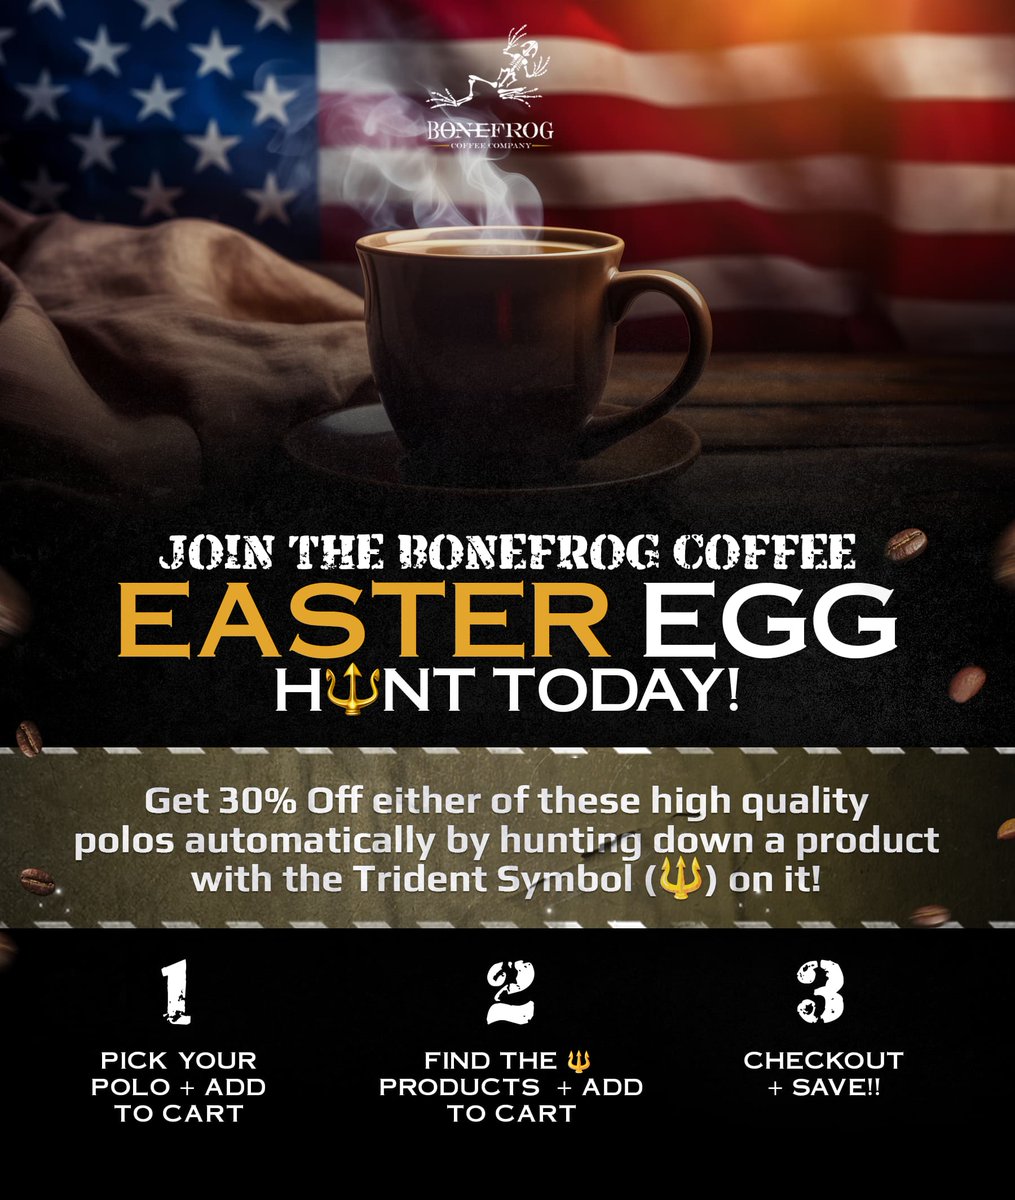 🐰 Hop into Easter weekend with Bonefrog Coffee's scavenger hunt! 🐰 Break from #MugMadness for Easter fun. Visit bonefrogcoffee.com and add your polo to your cart. Find trident logo products🔱 and add them, too. Get 30% off your polo purchase at checkout. #BonefrogCoffee